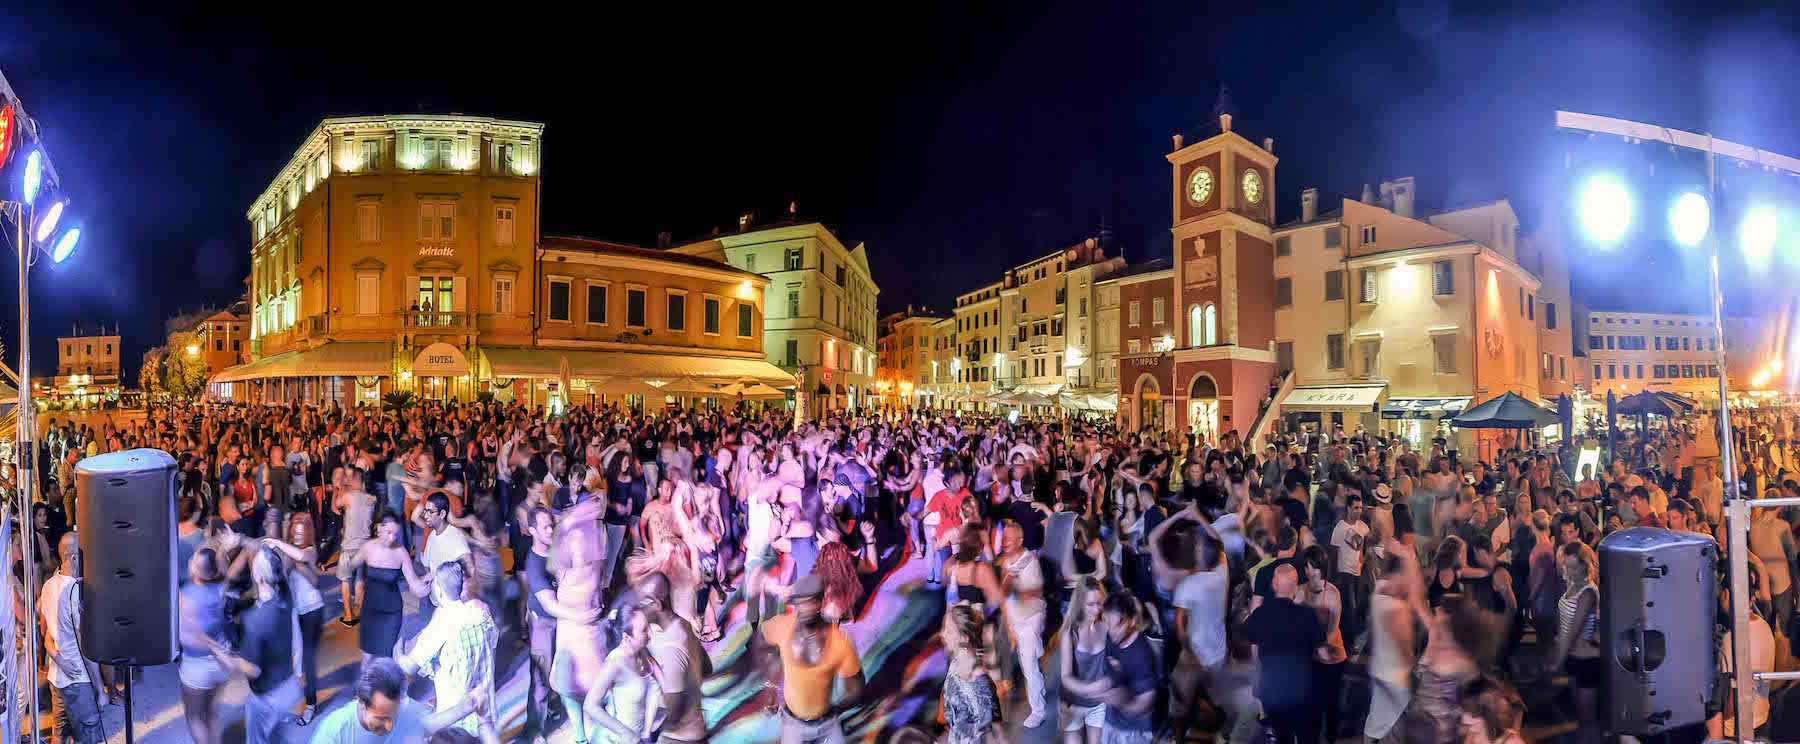 8 things you should know before you come to Summer Sensual Days and Croatian Summer Salsa Festival